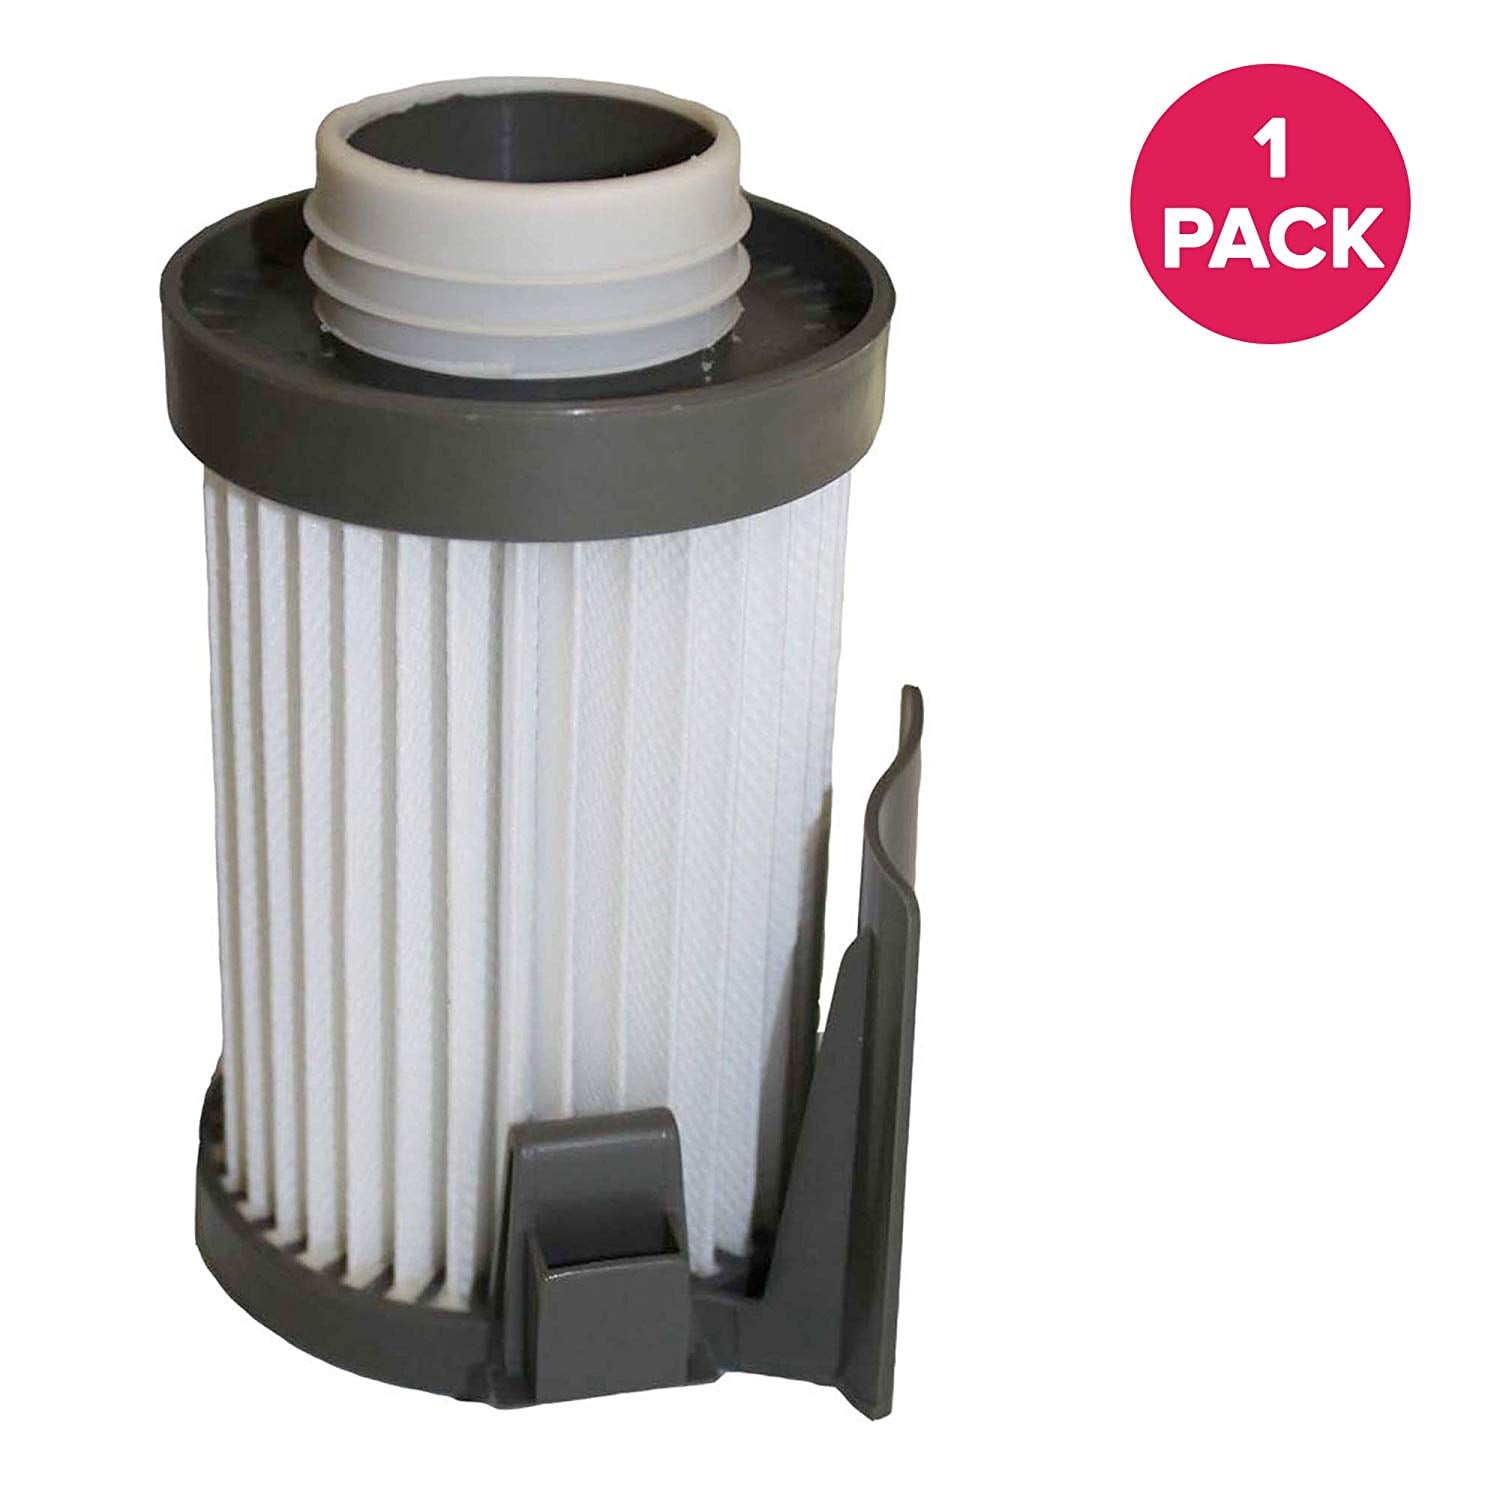 431AX Z_623964 62731b Fits: 430 Series Lightweight Uprights & Stick Vacuum 431A 62731A Replaces Parts# DCF14 ZVac 4Pk Compatible Filter Replacement for Eureka DCF-10,Amp & DCF-14 HEPA Filters DCF10 426A 